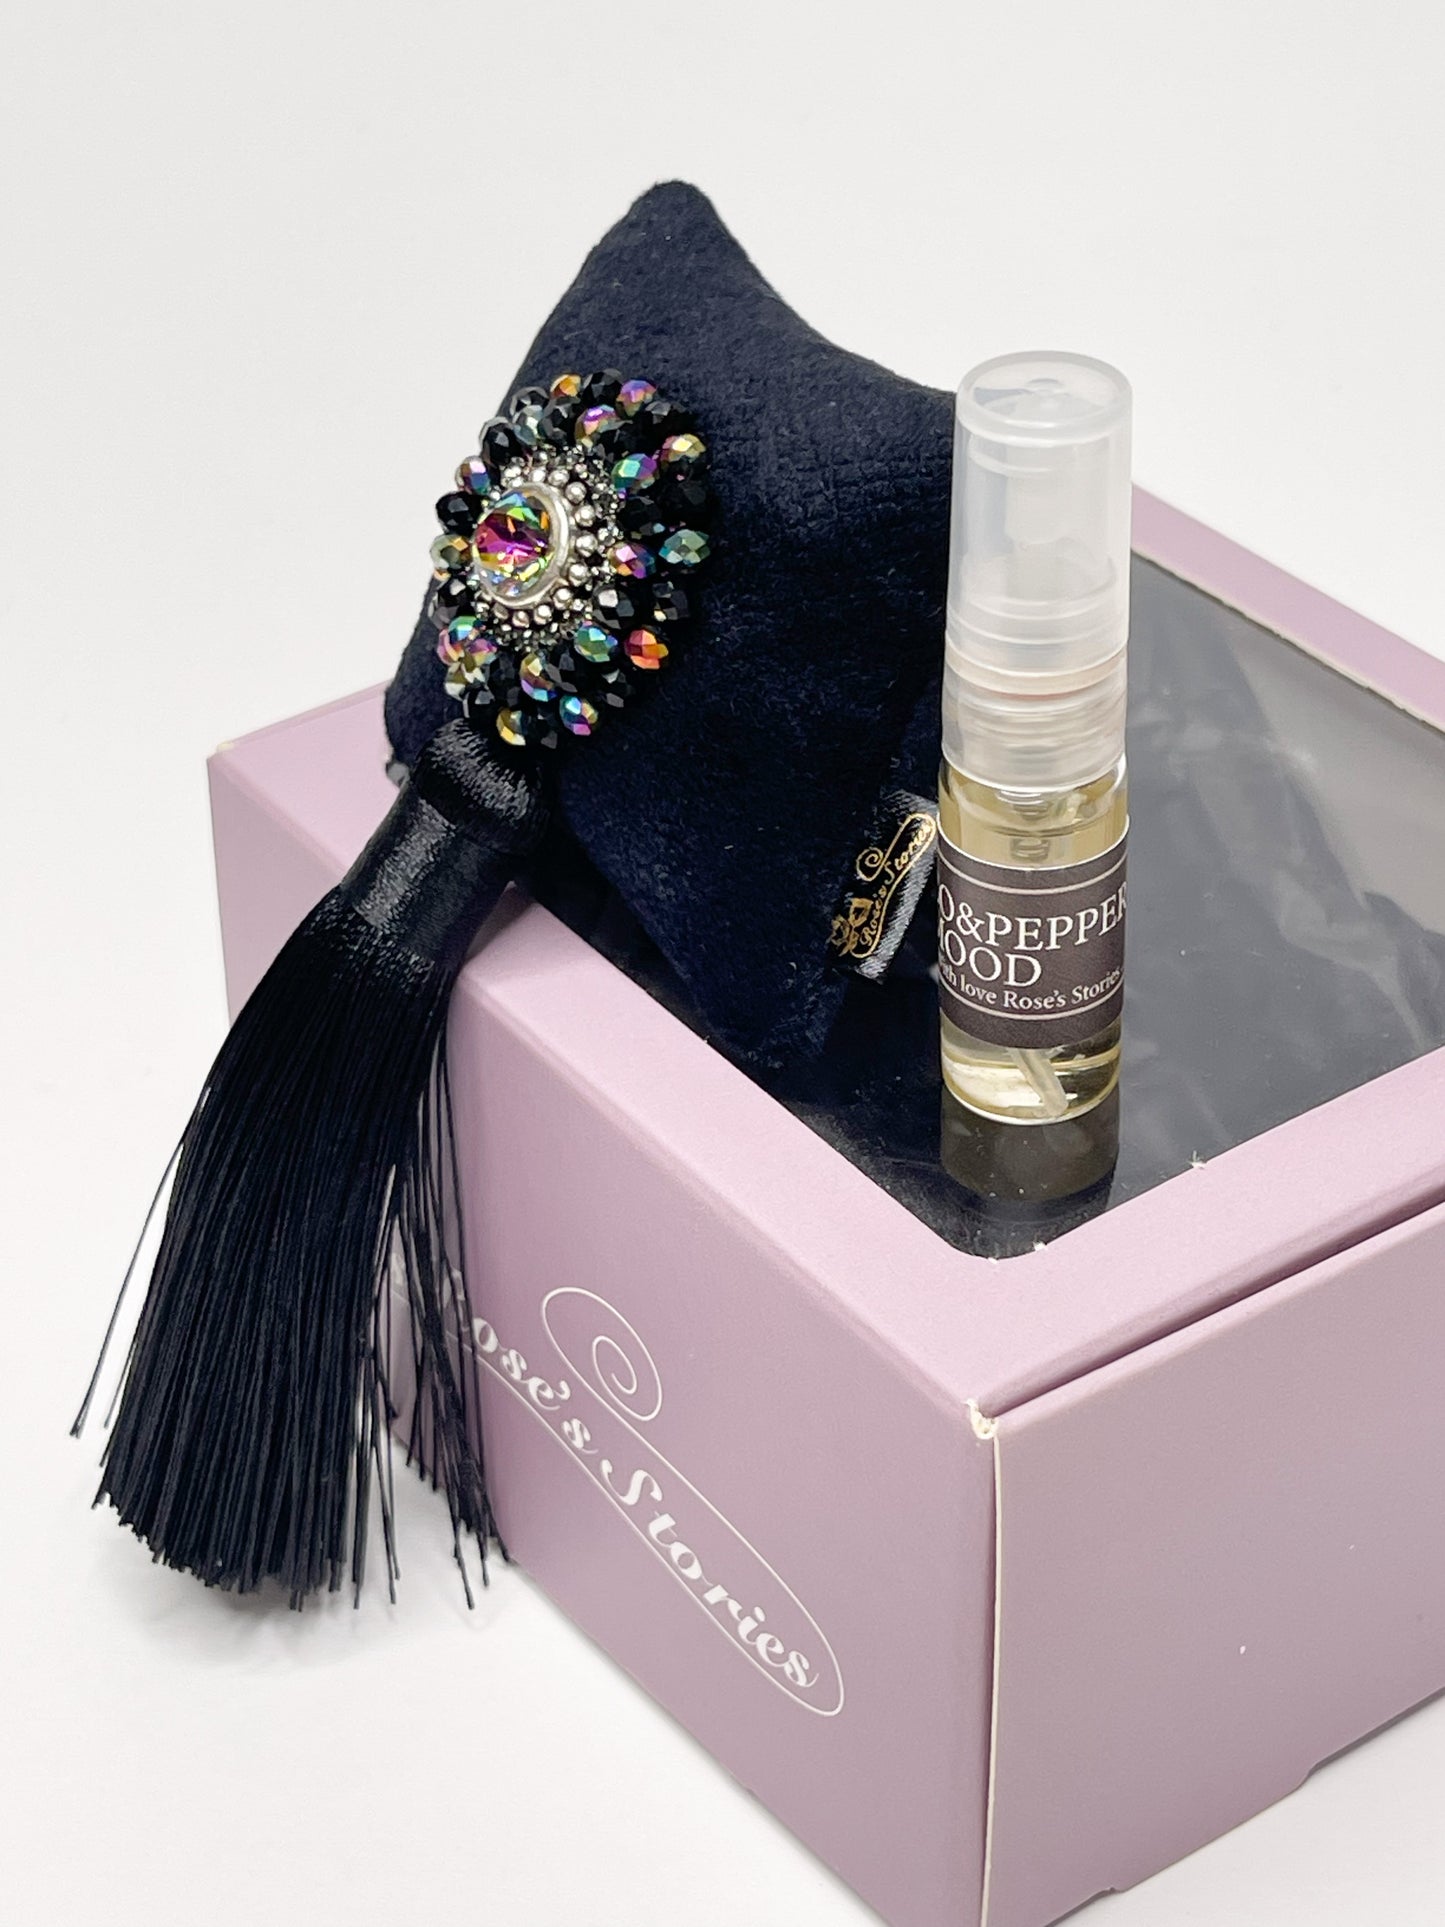 Car fragrance with sparkling crystals